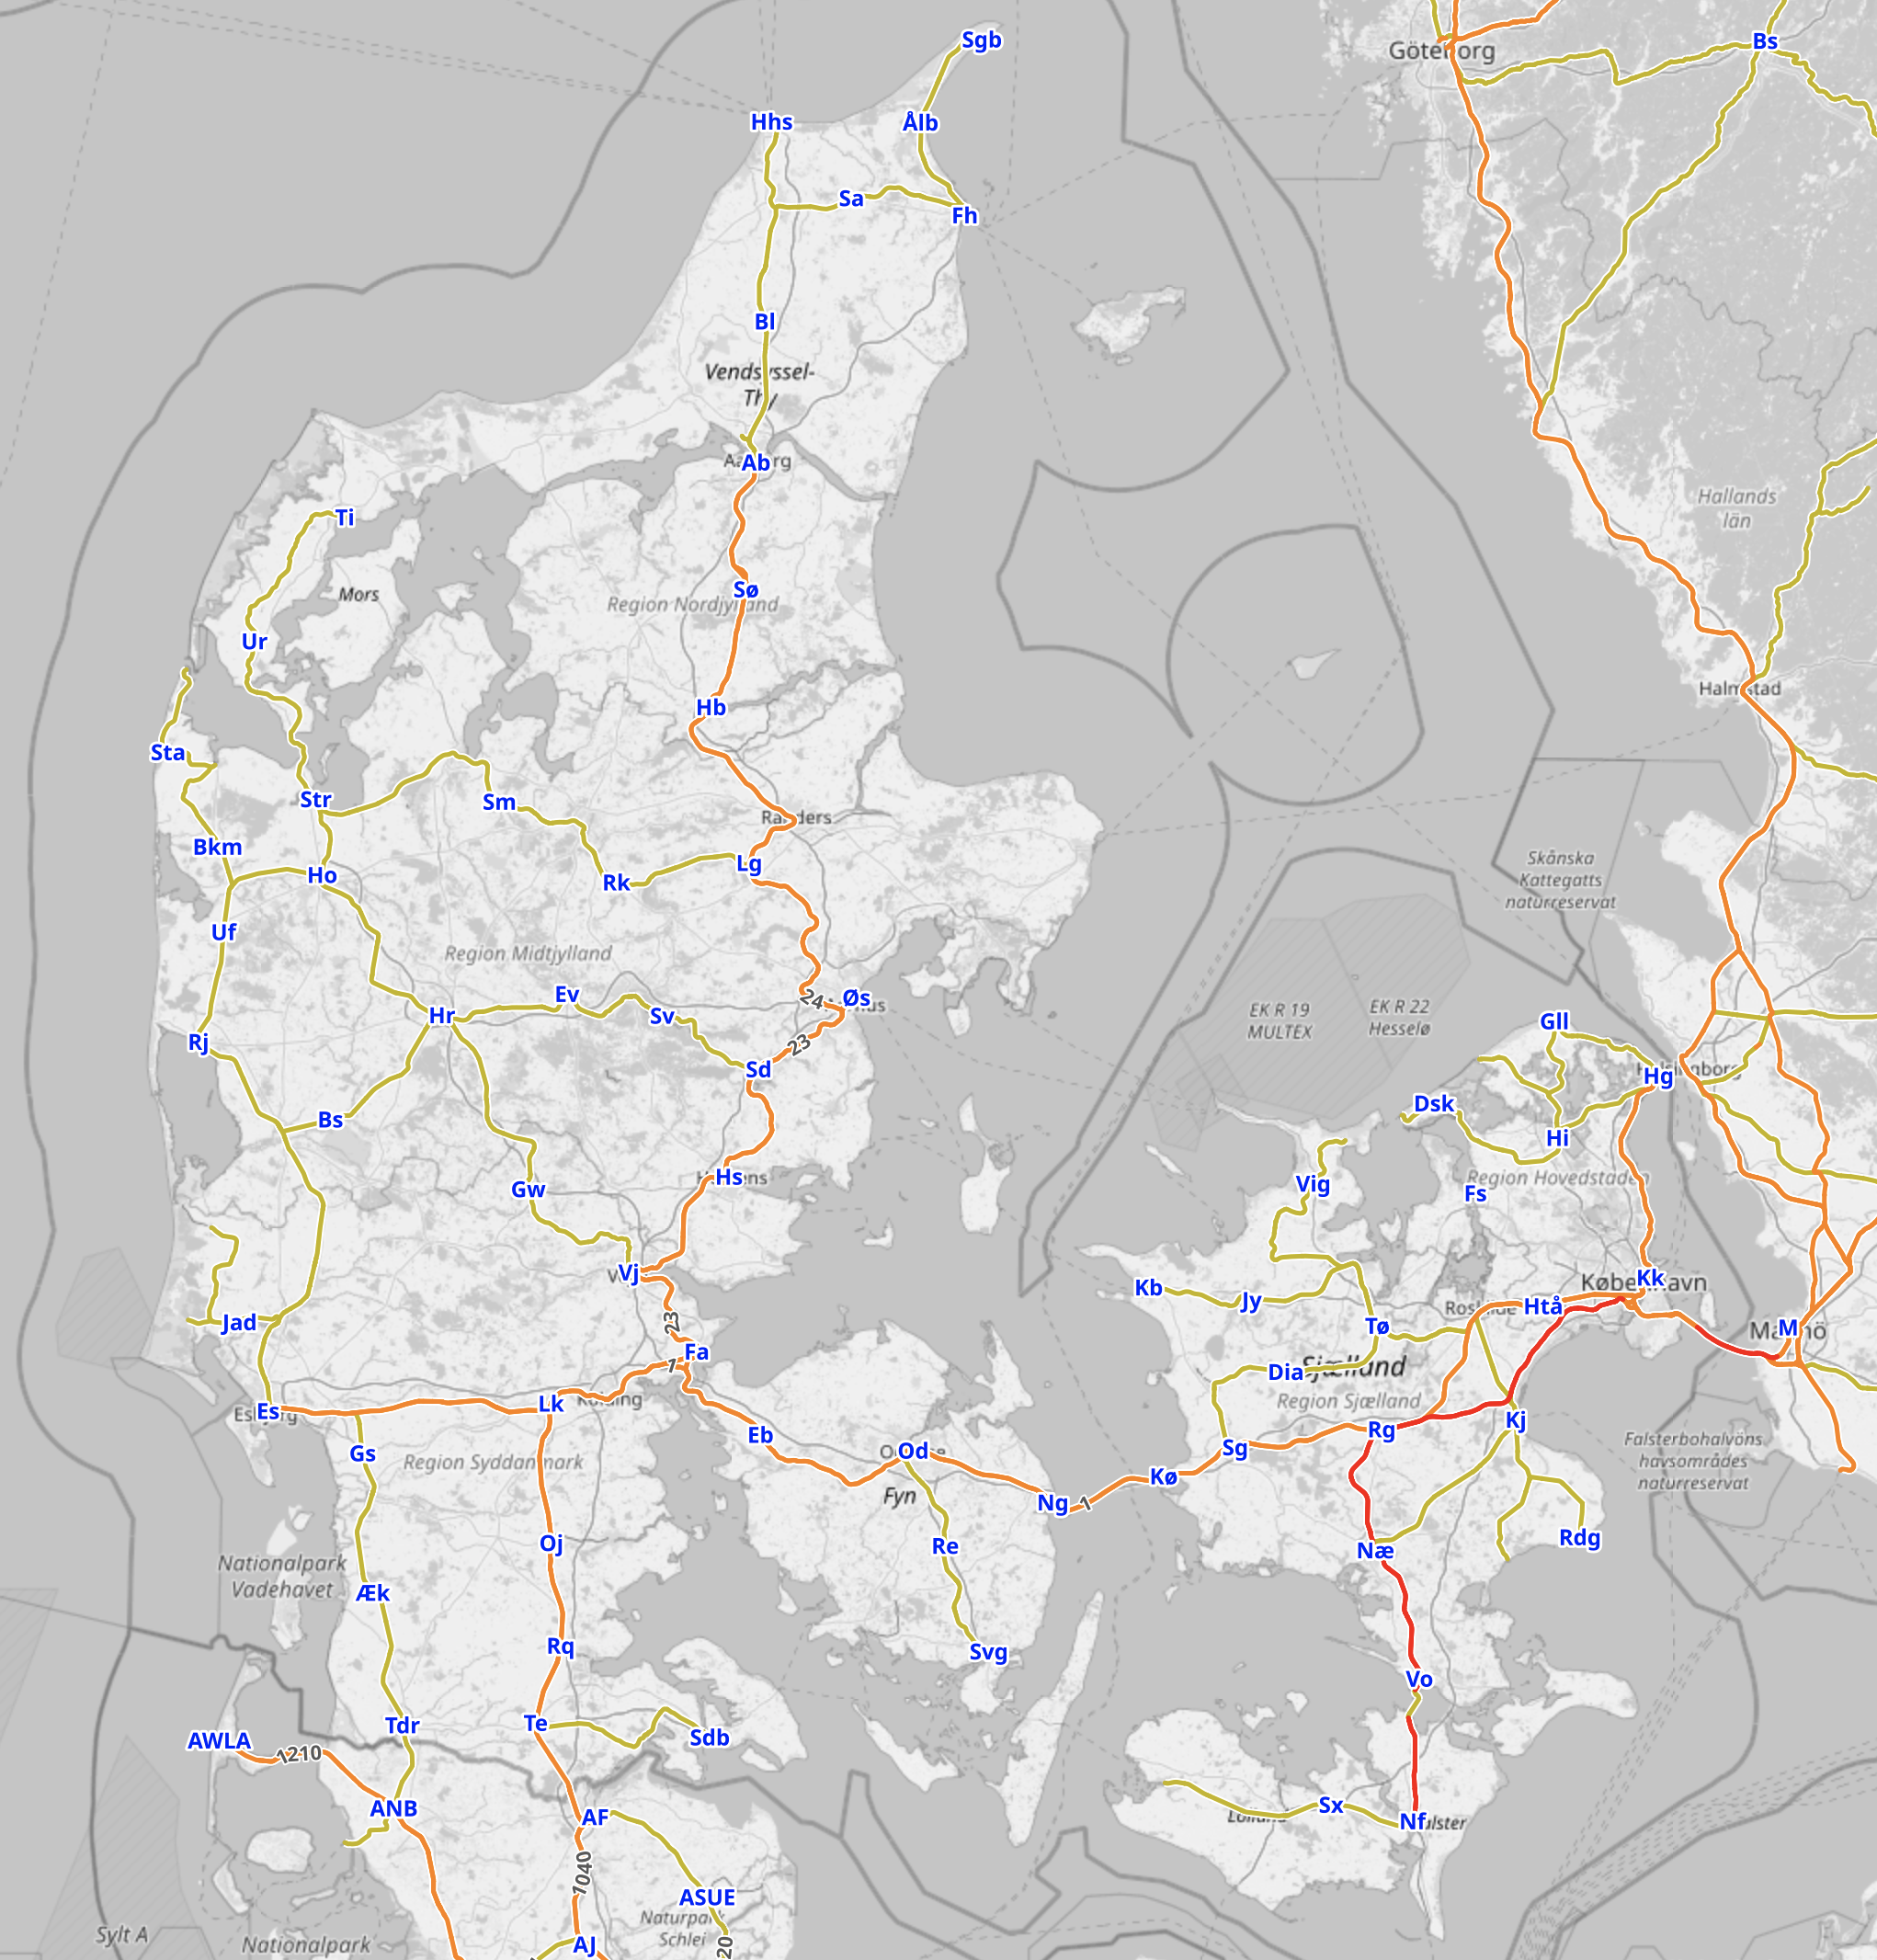 A map of Denmark showing the train lines (from OpenRailwayMap).